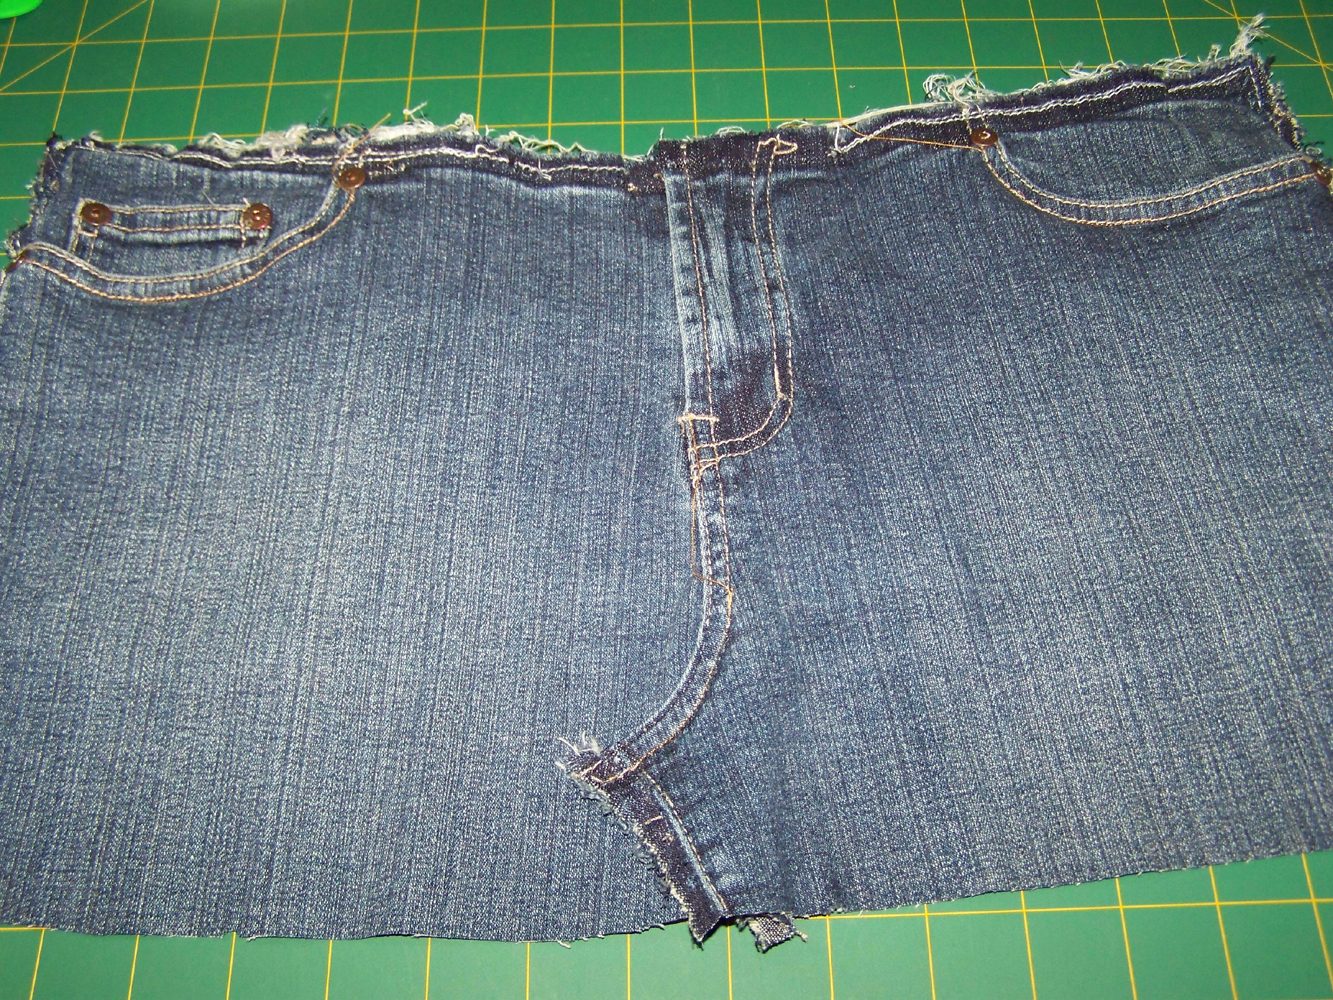 SHARLZNDOLLZ: Craft tutorial - Humbug denim pencil case from recycled jeans